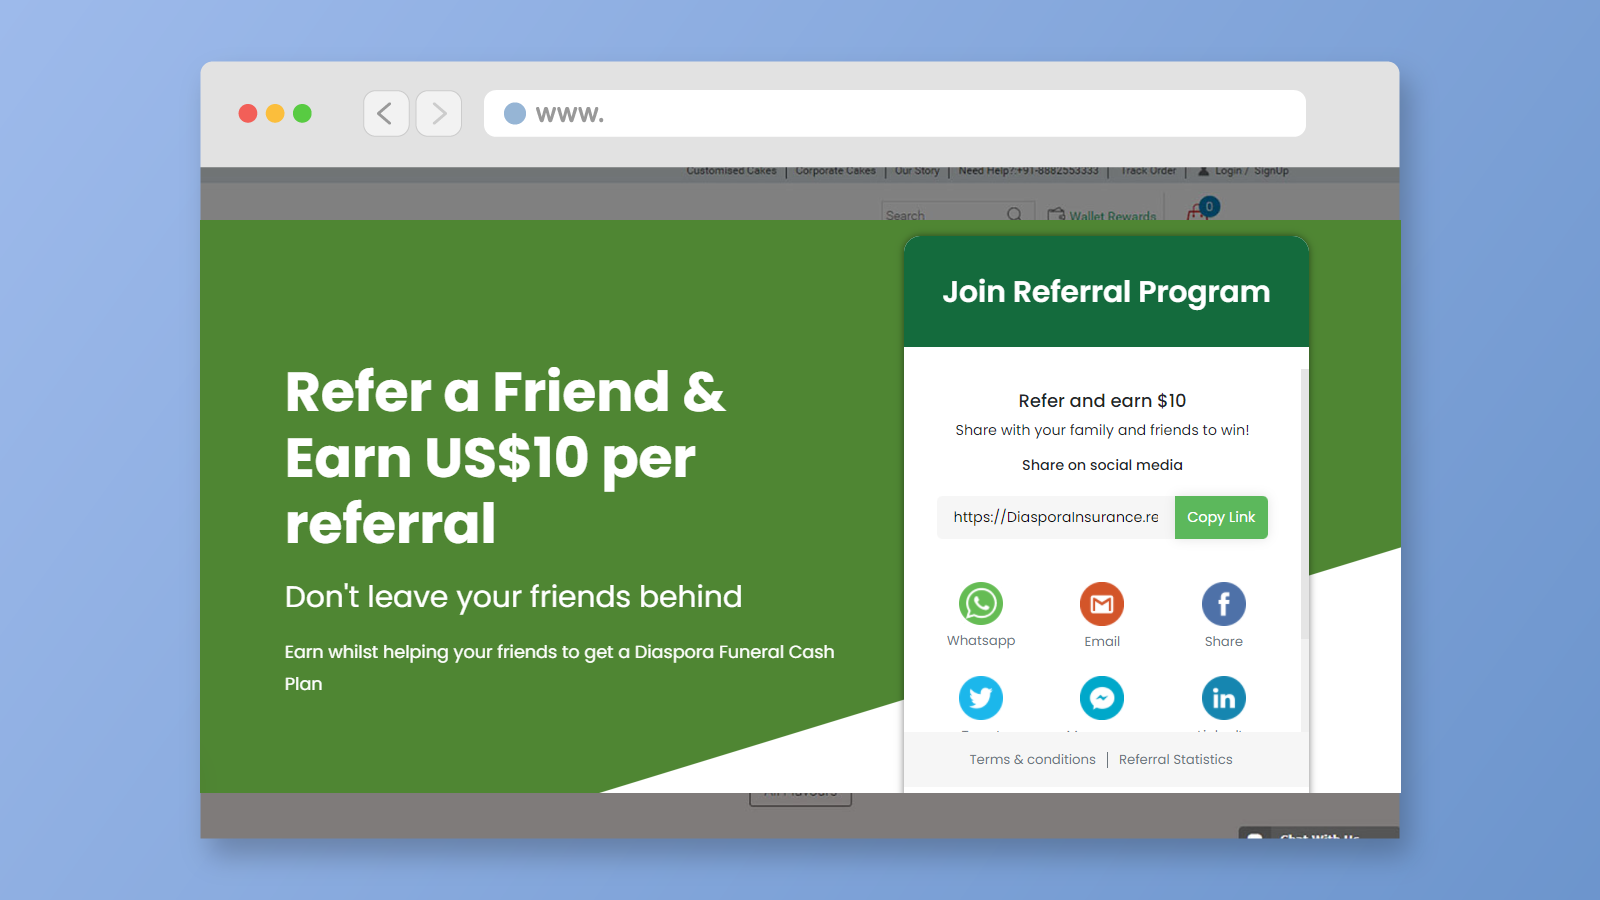 Refer and Earn Campaign